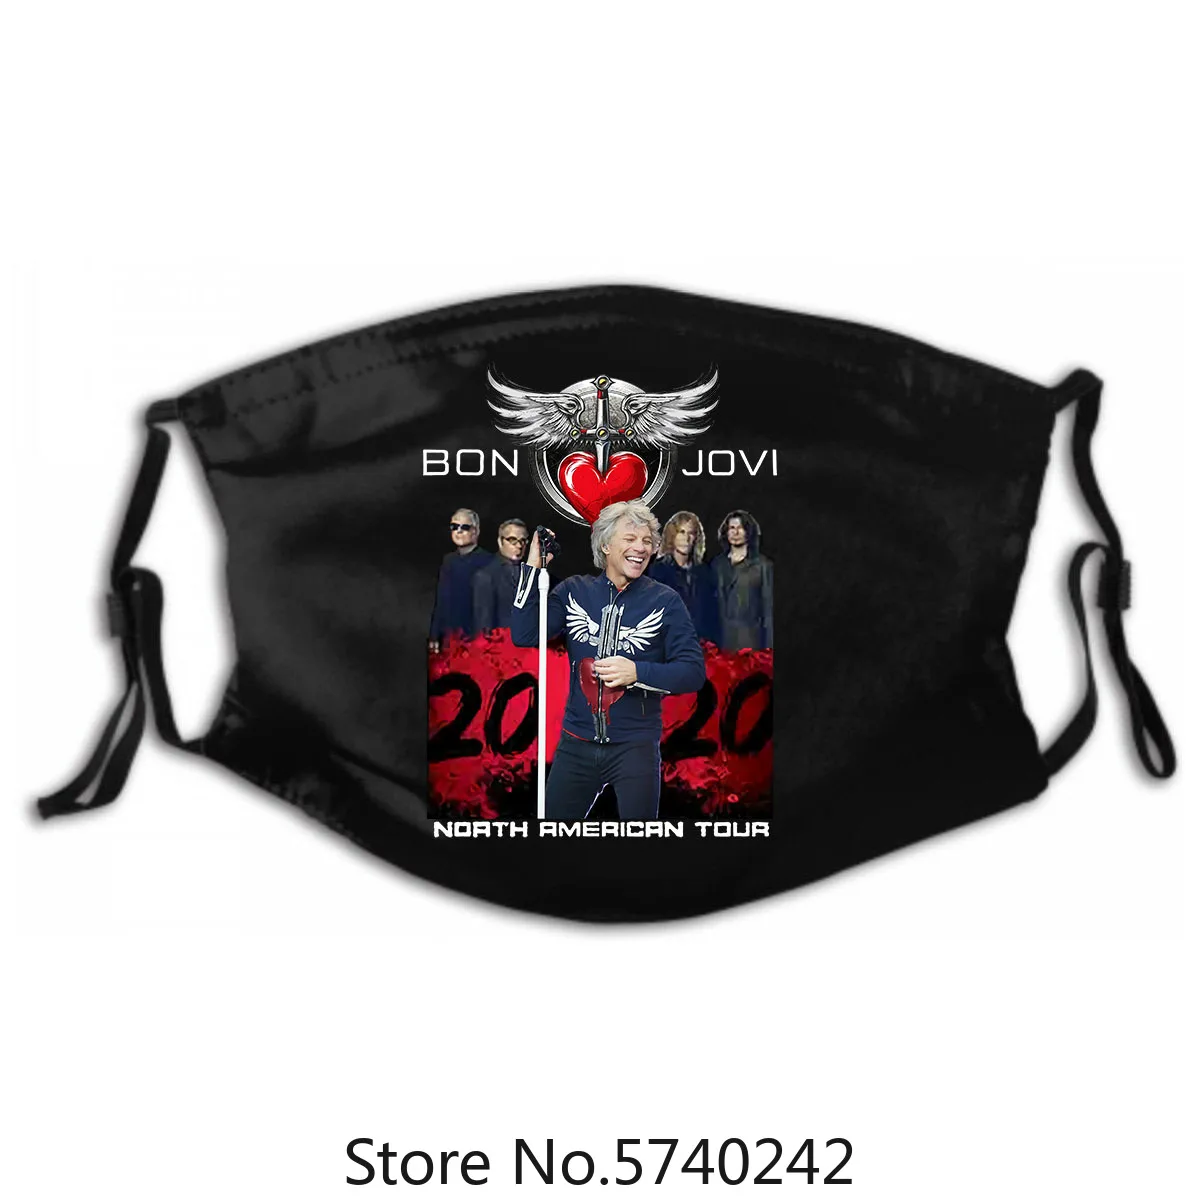 

Adams 2020 Concert Tour Cotton Bon Jovi And Bryan Mask Washable Reusable Mask with PM2.5 Filters 5 Layers of Protection